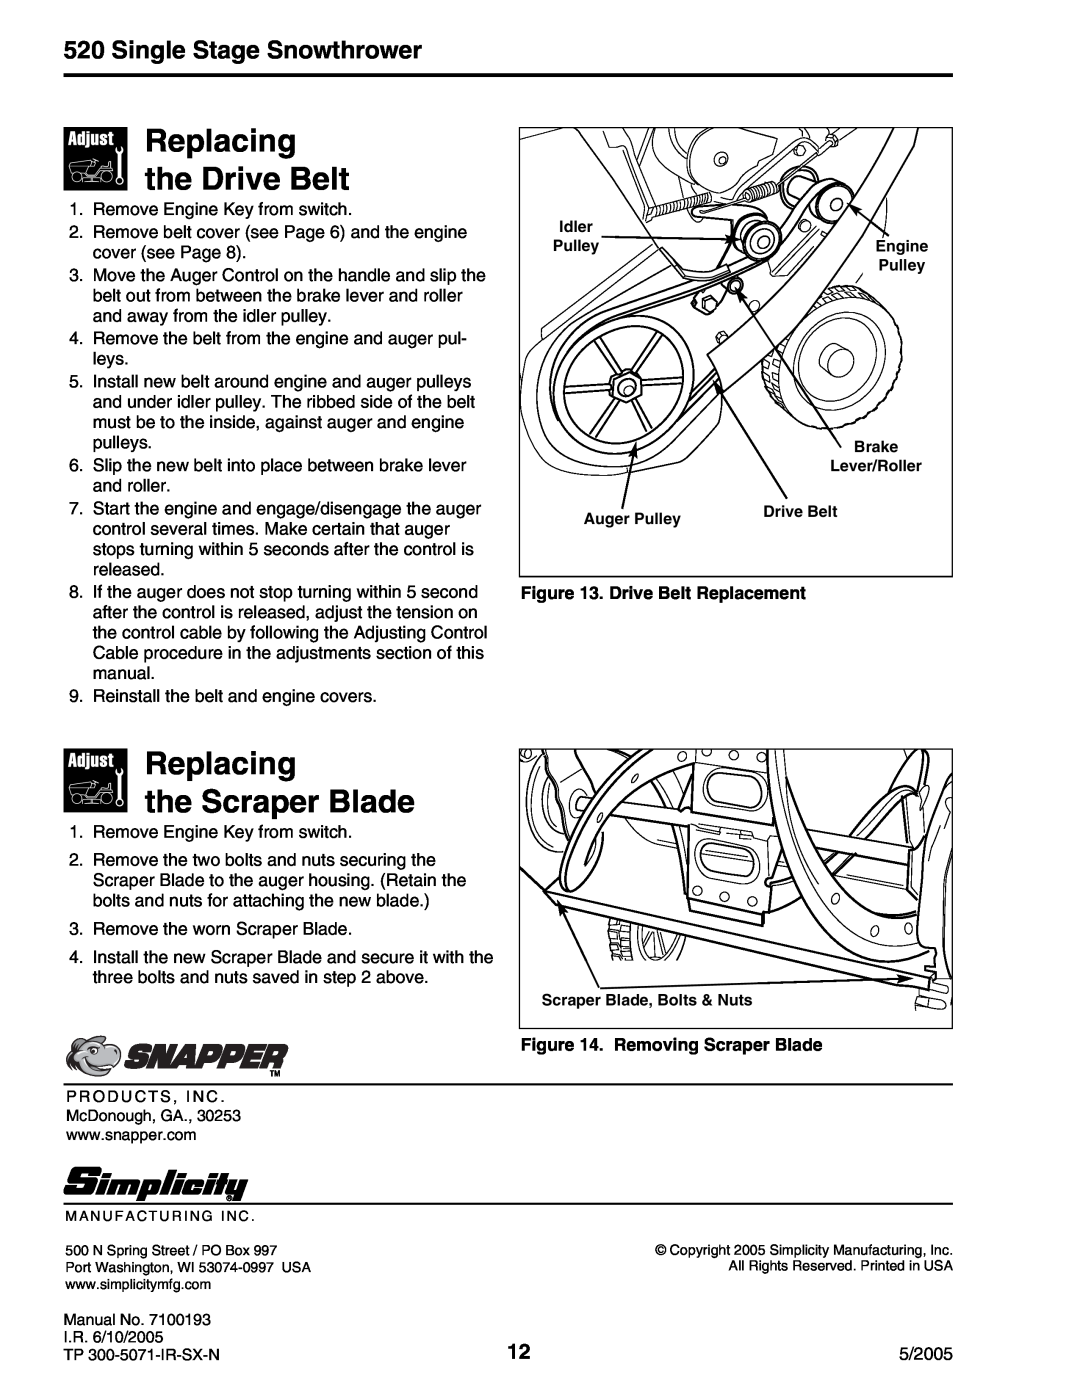 Snapper 5201M Replacing the Drive Belt, Replacing the Scraper Blade, Single Stage Snowthrower, Drive Belt Replacement 